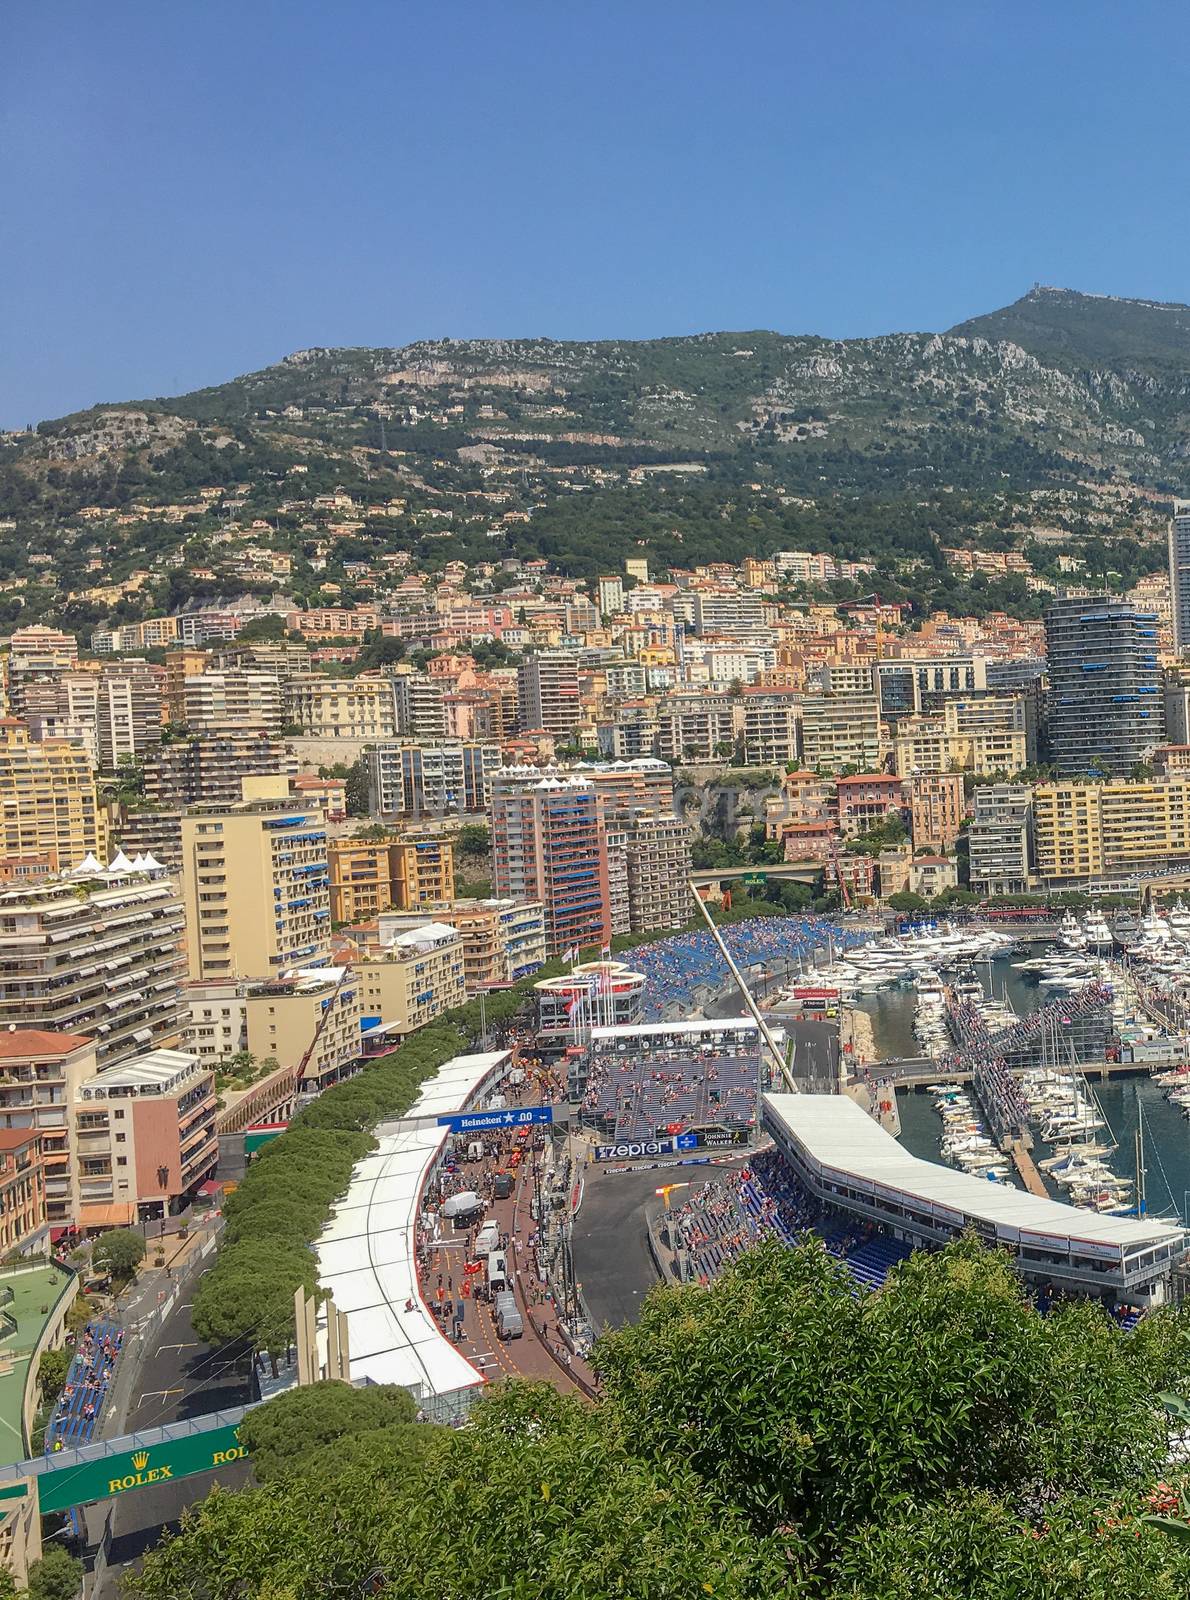 view to the formula 1 race in monaco by Tevion25